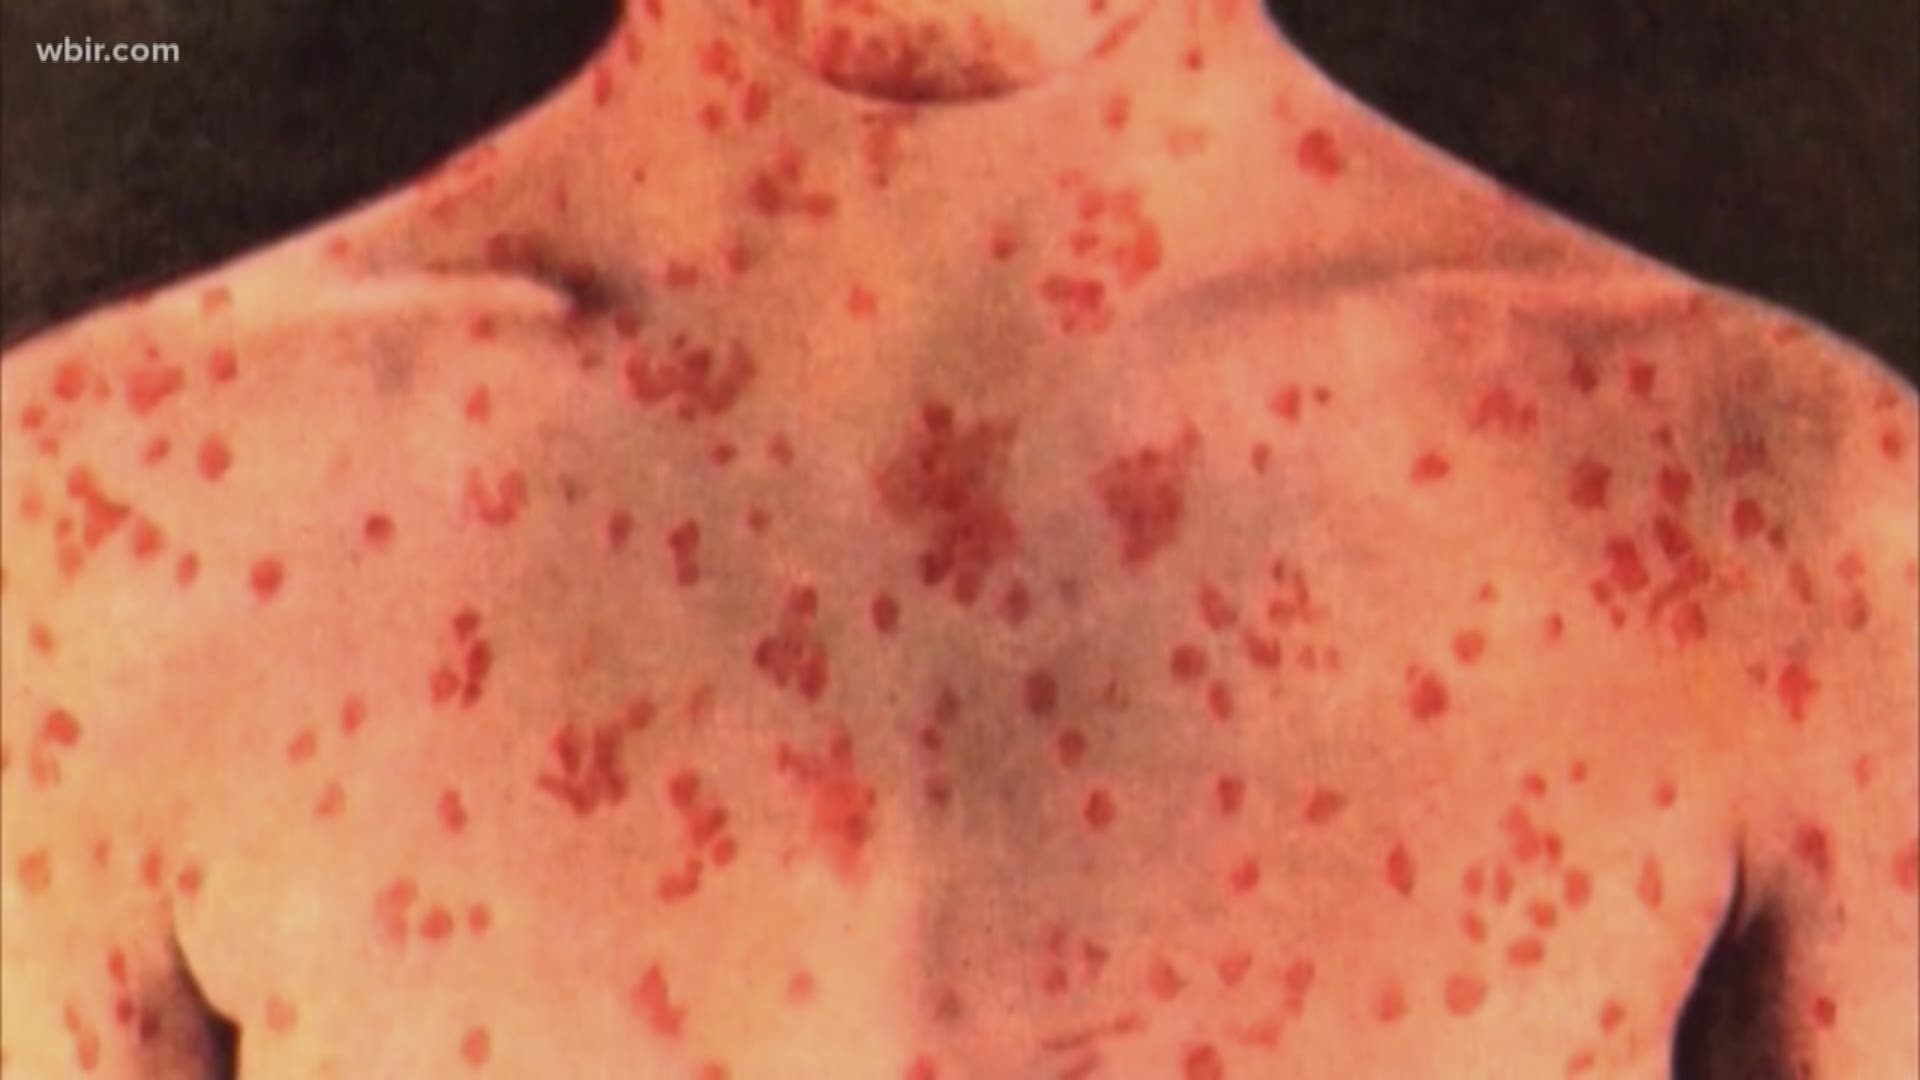 Two people the health department identified as contacts with the first case in the state now have the measles.